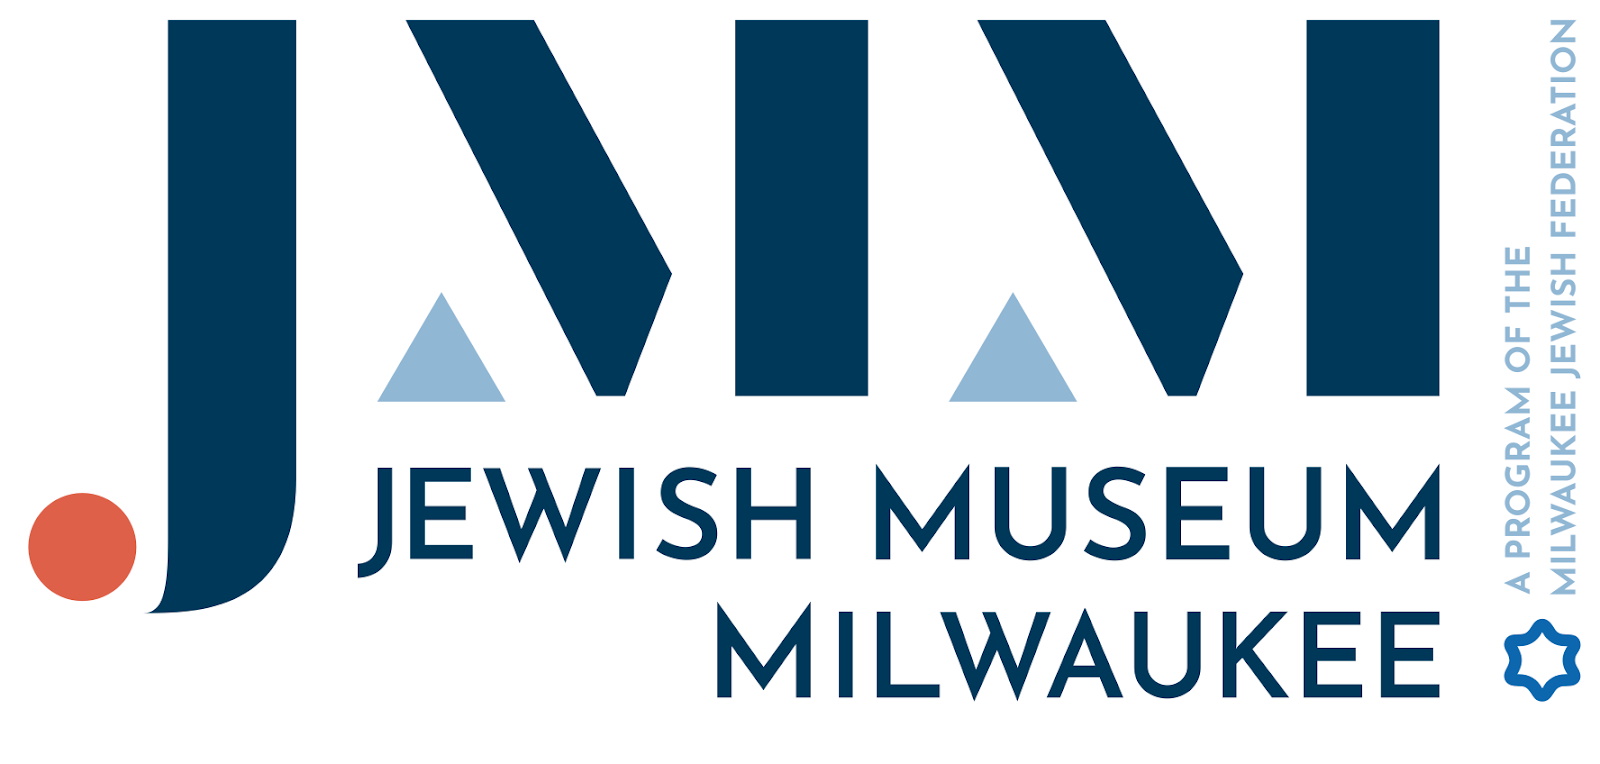 Jewish Museum Milwaukee Presents New Exhibit “Women Pulling at the Threads of Social Discourse”